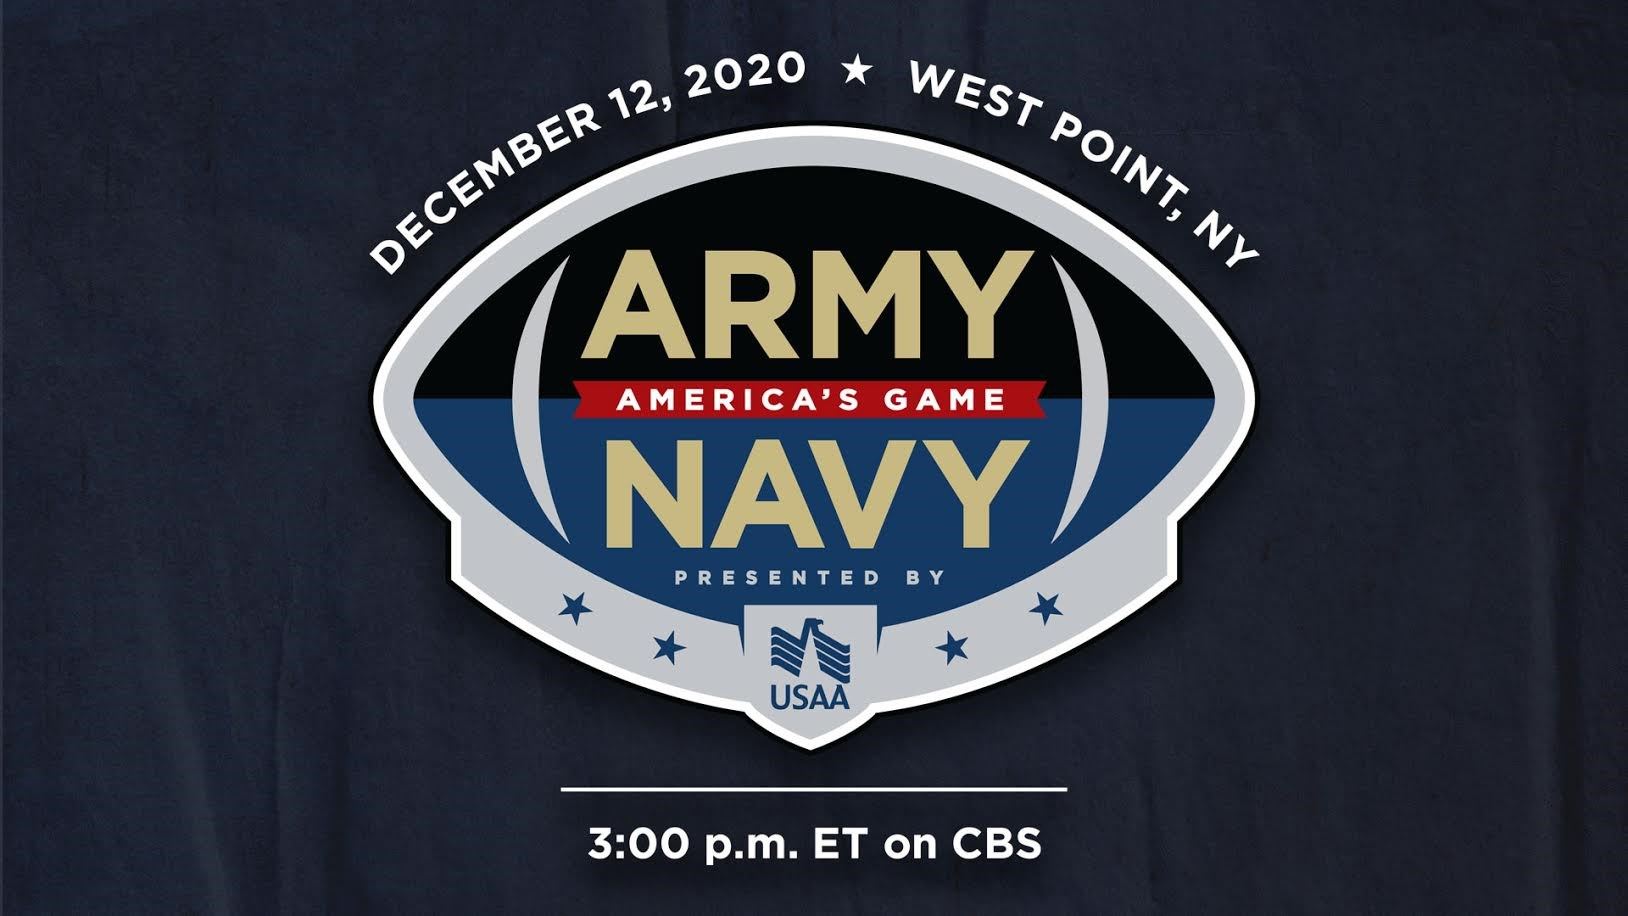 How to Watch Army vs Navy December 12, 2020 Cord Cutters News